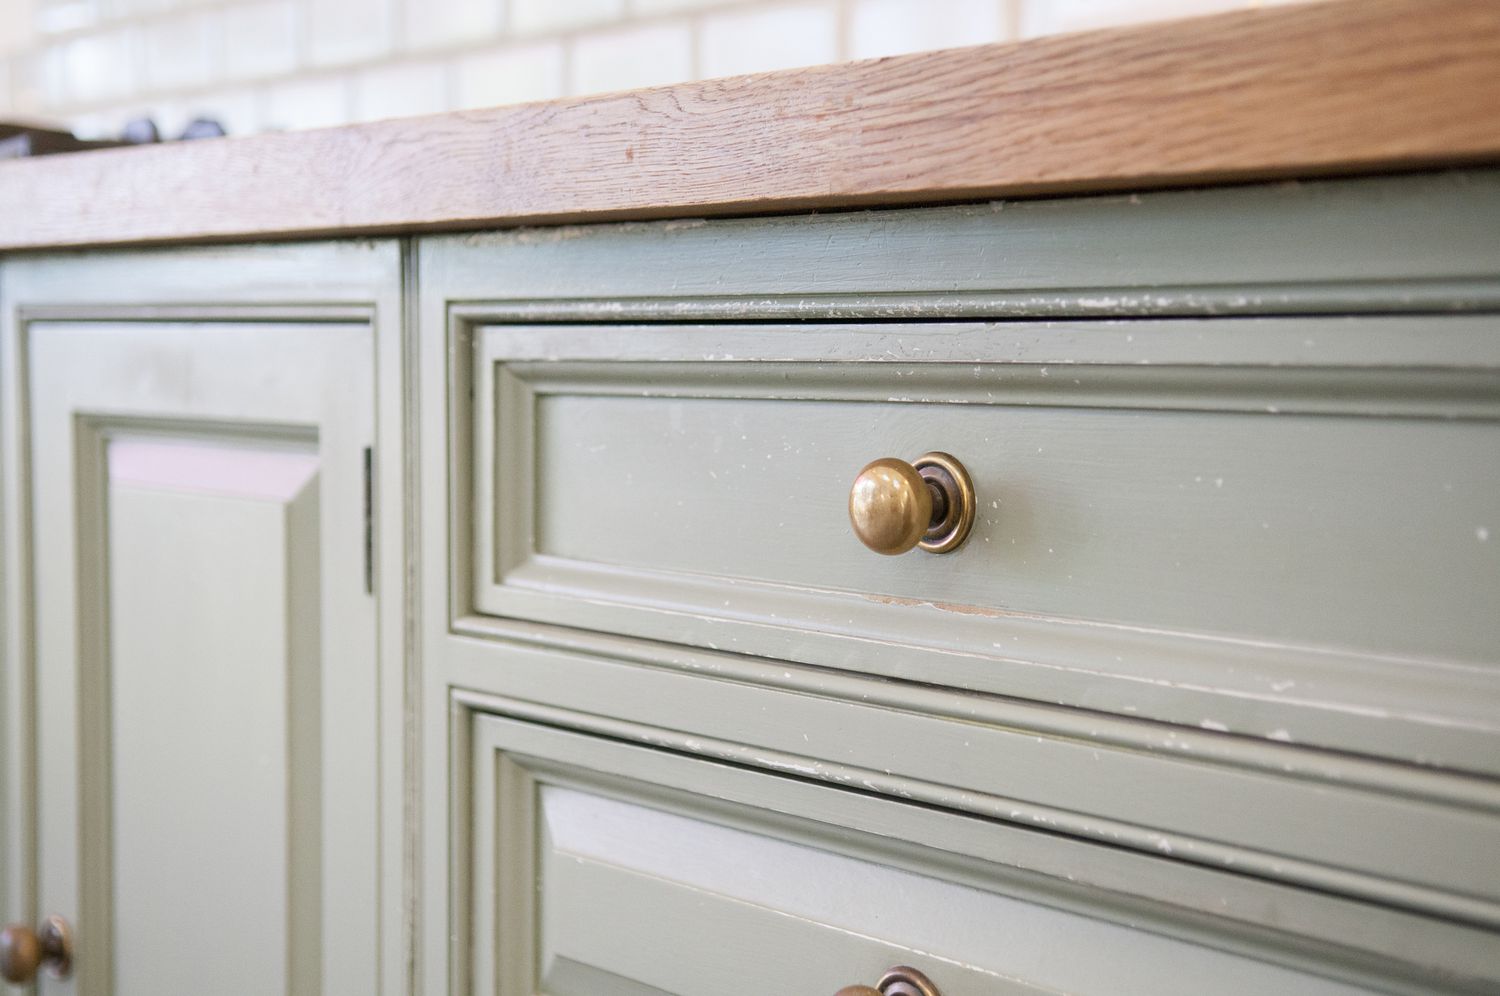 How To Add Long Handles To A Dresser With Knobs